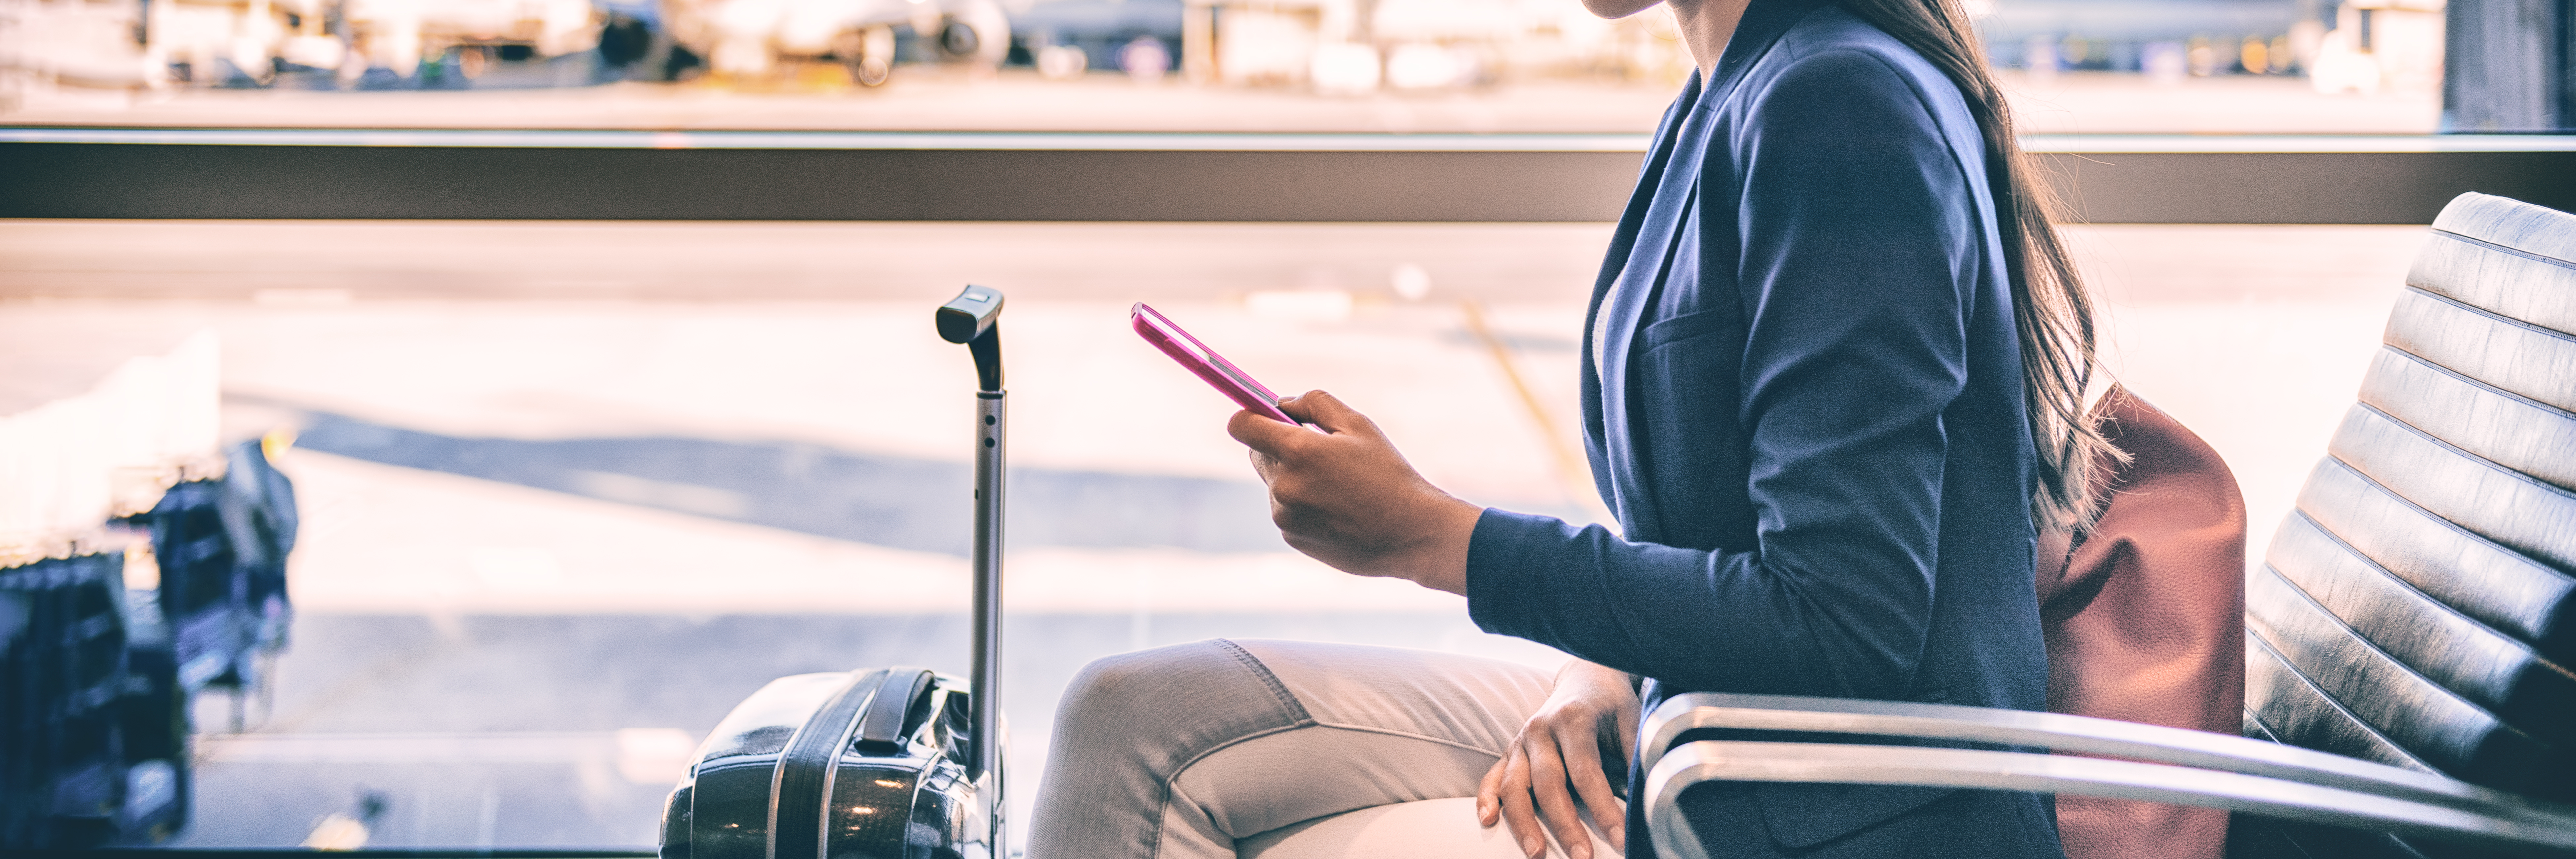 Woman on phone sitting in airport